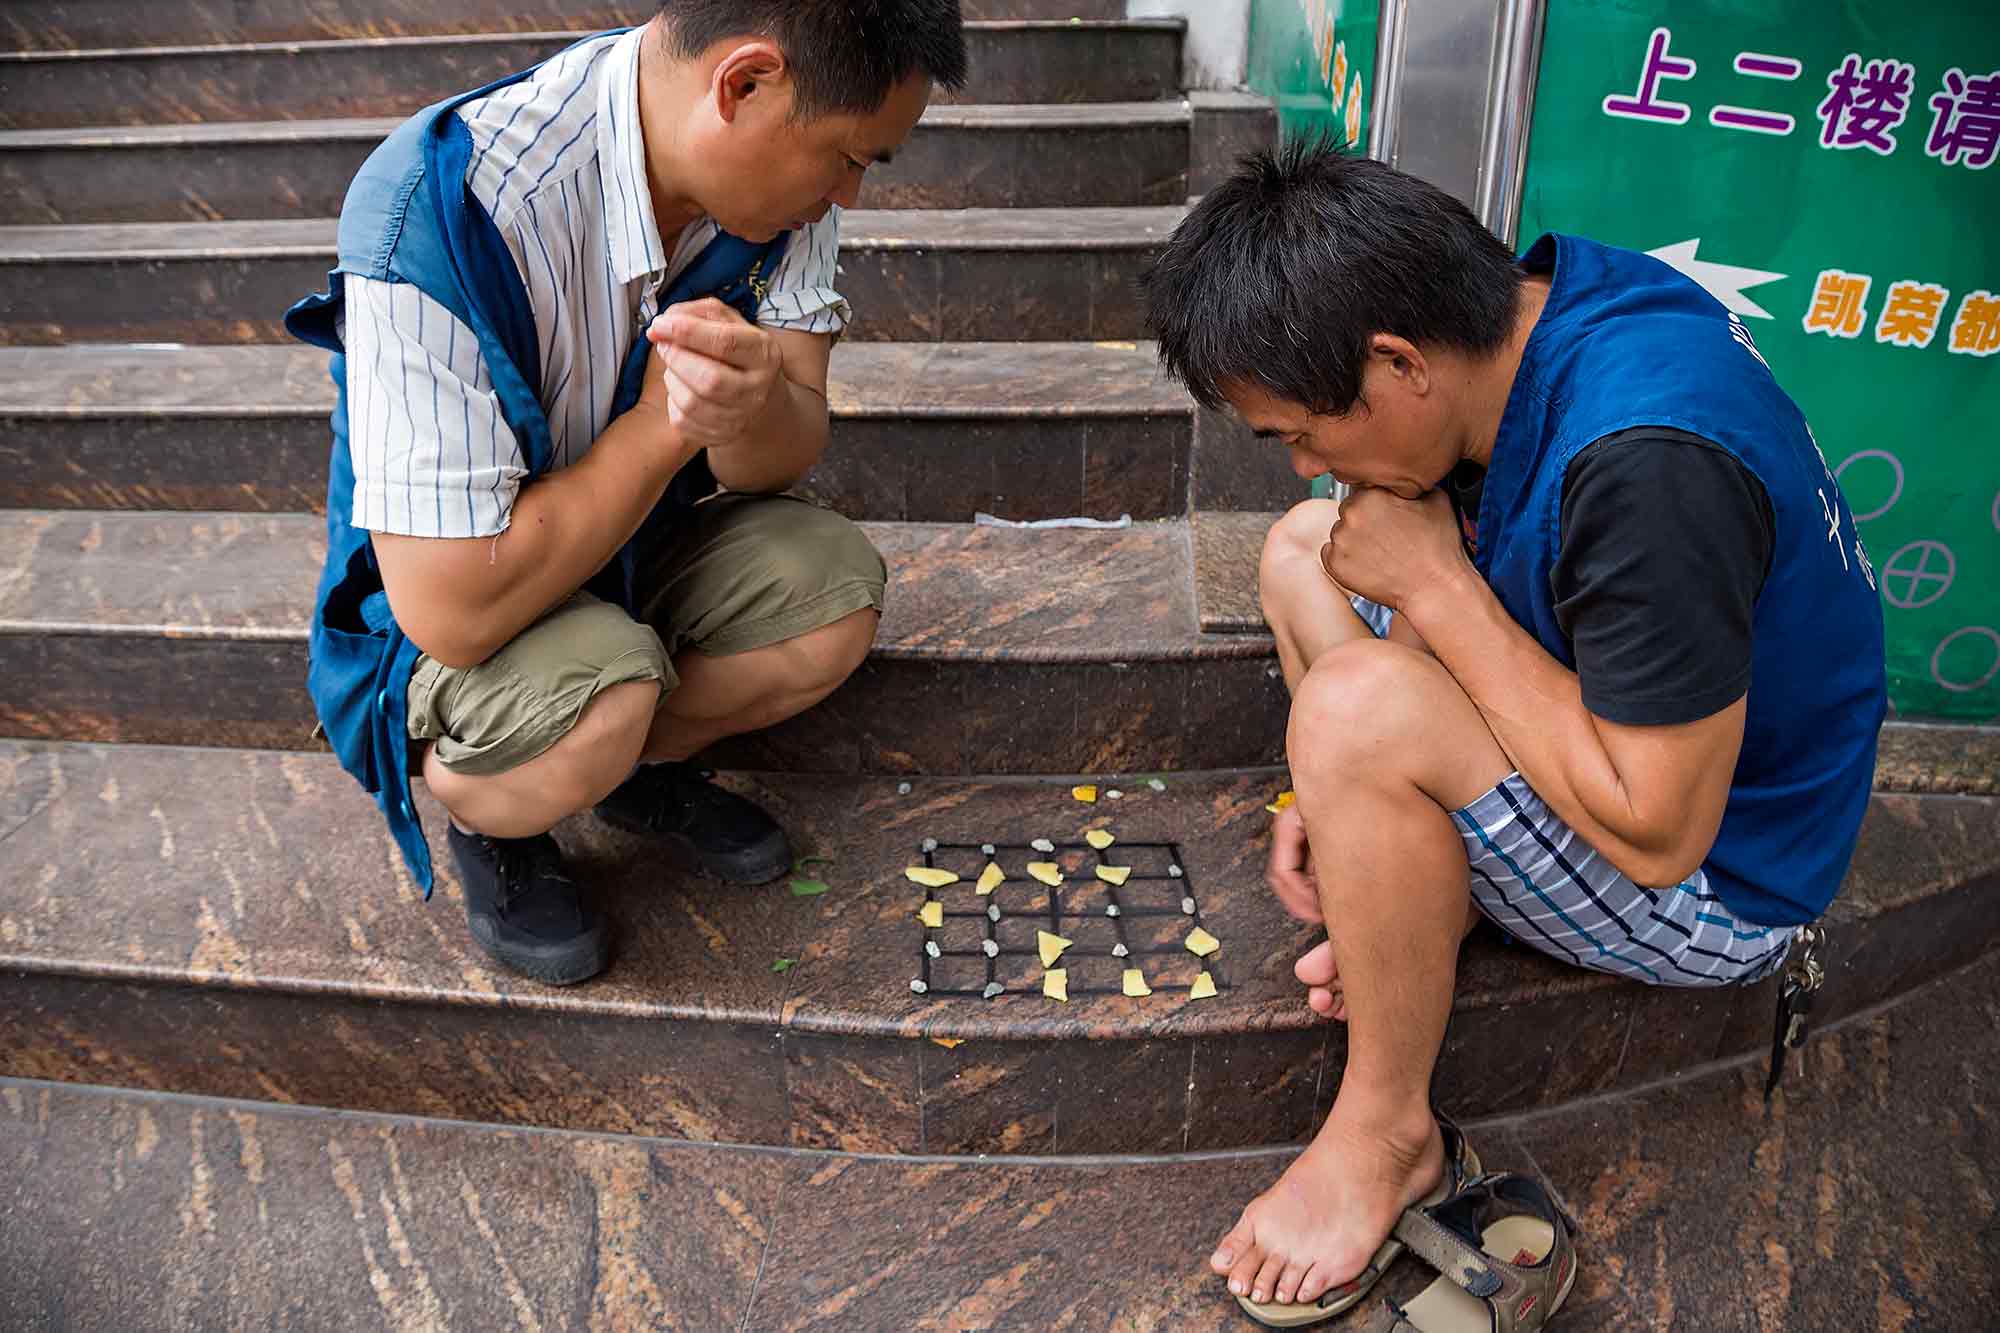 Playing a game of Mahjong in the streets of Guangzhou. © Ulli Maier & Nisa Maier